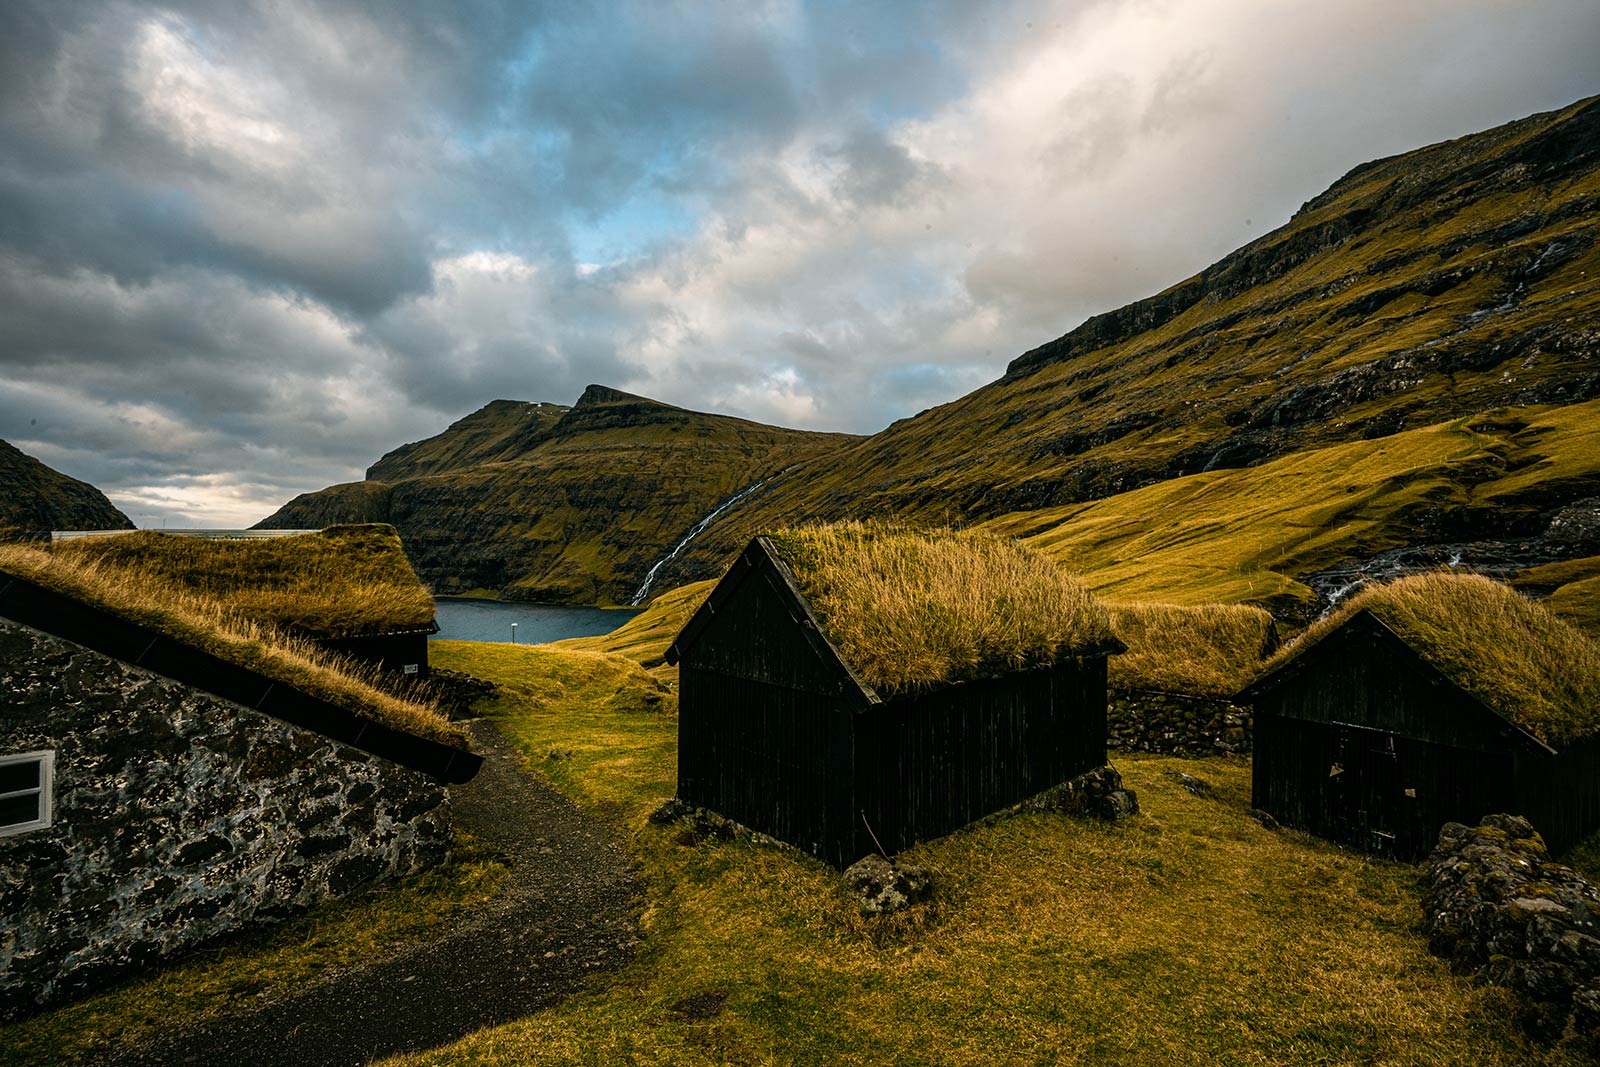 Houses with turf roof at Saksun in Faroe Islands. The gem of the Faroe Islands